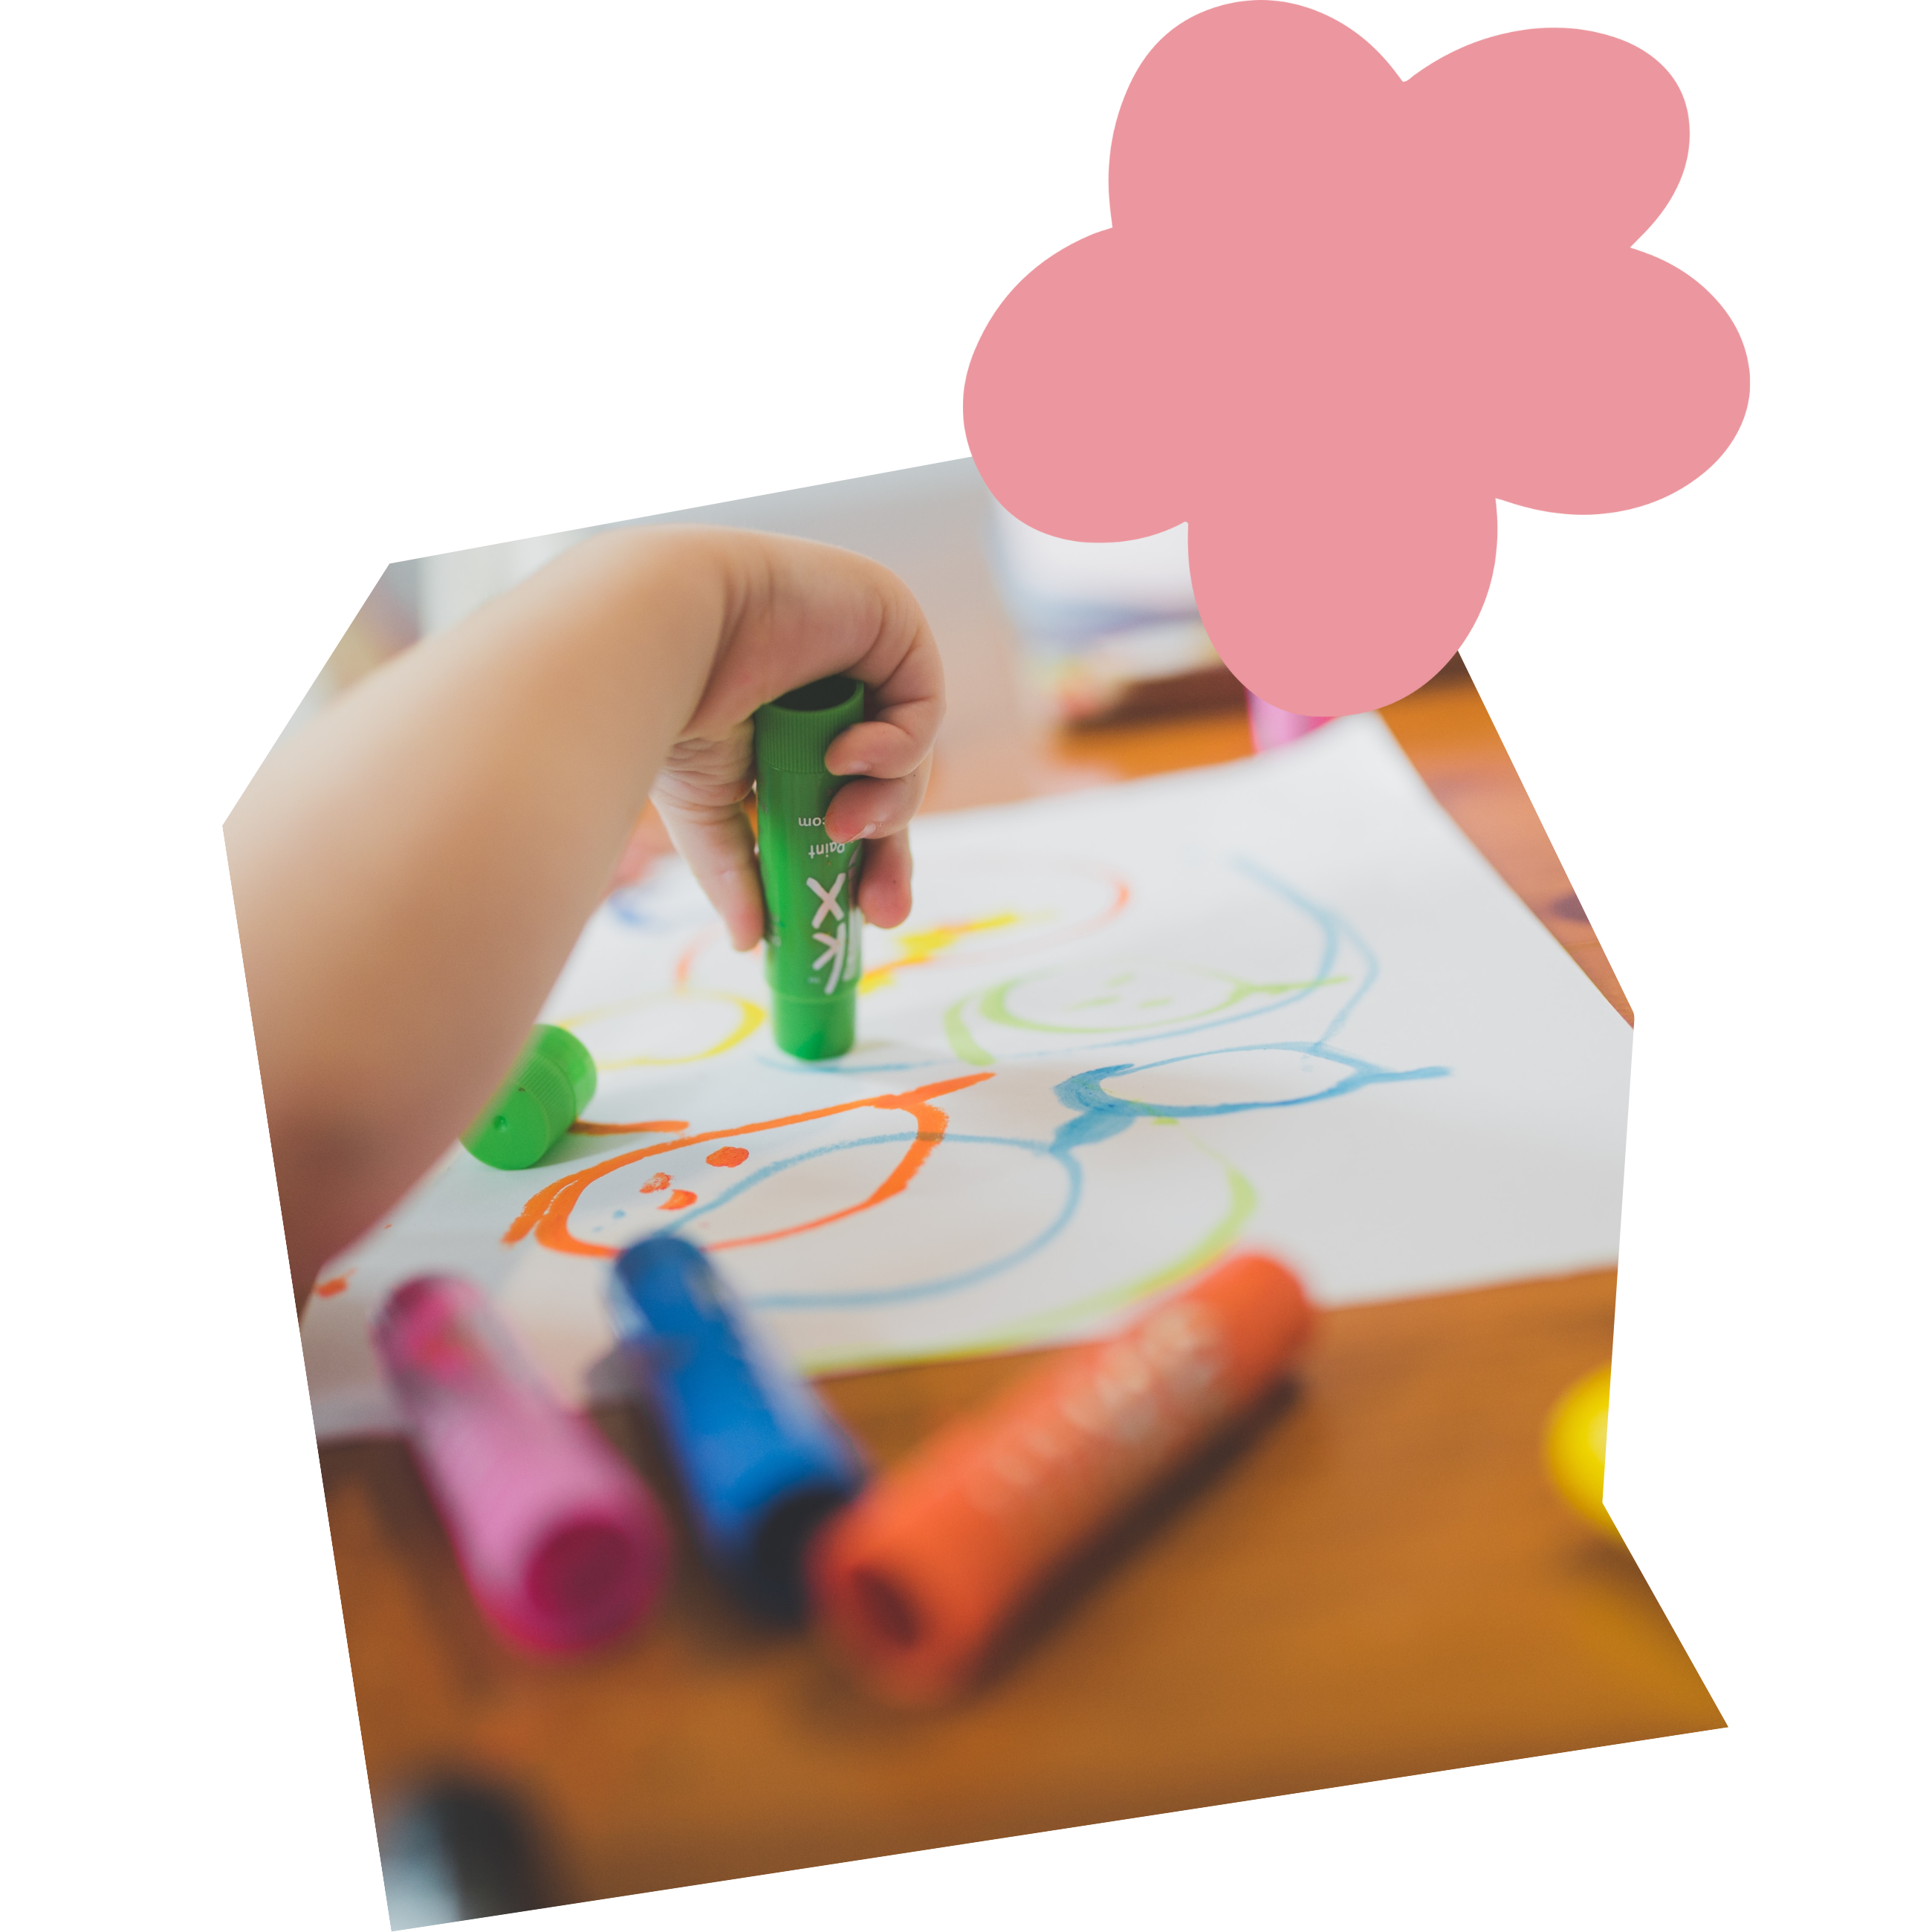 Image of a child coloring with markers